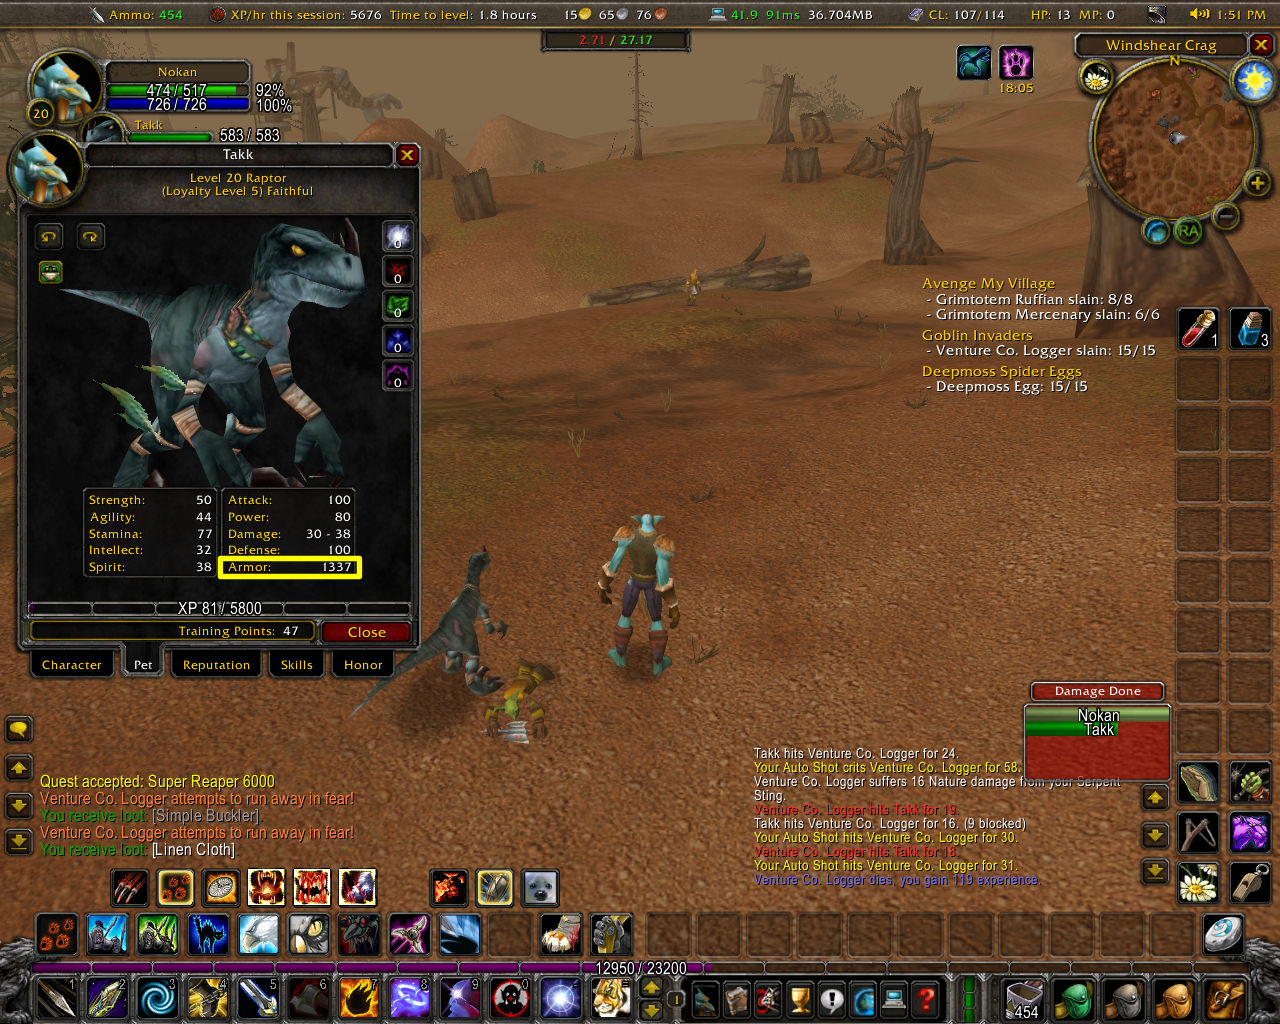 Screenshot of the busy World of Warcraft UI with buttons lining the edges of the screen and a pop-up window laid over a 3D world with multiple characters